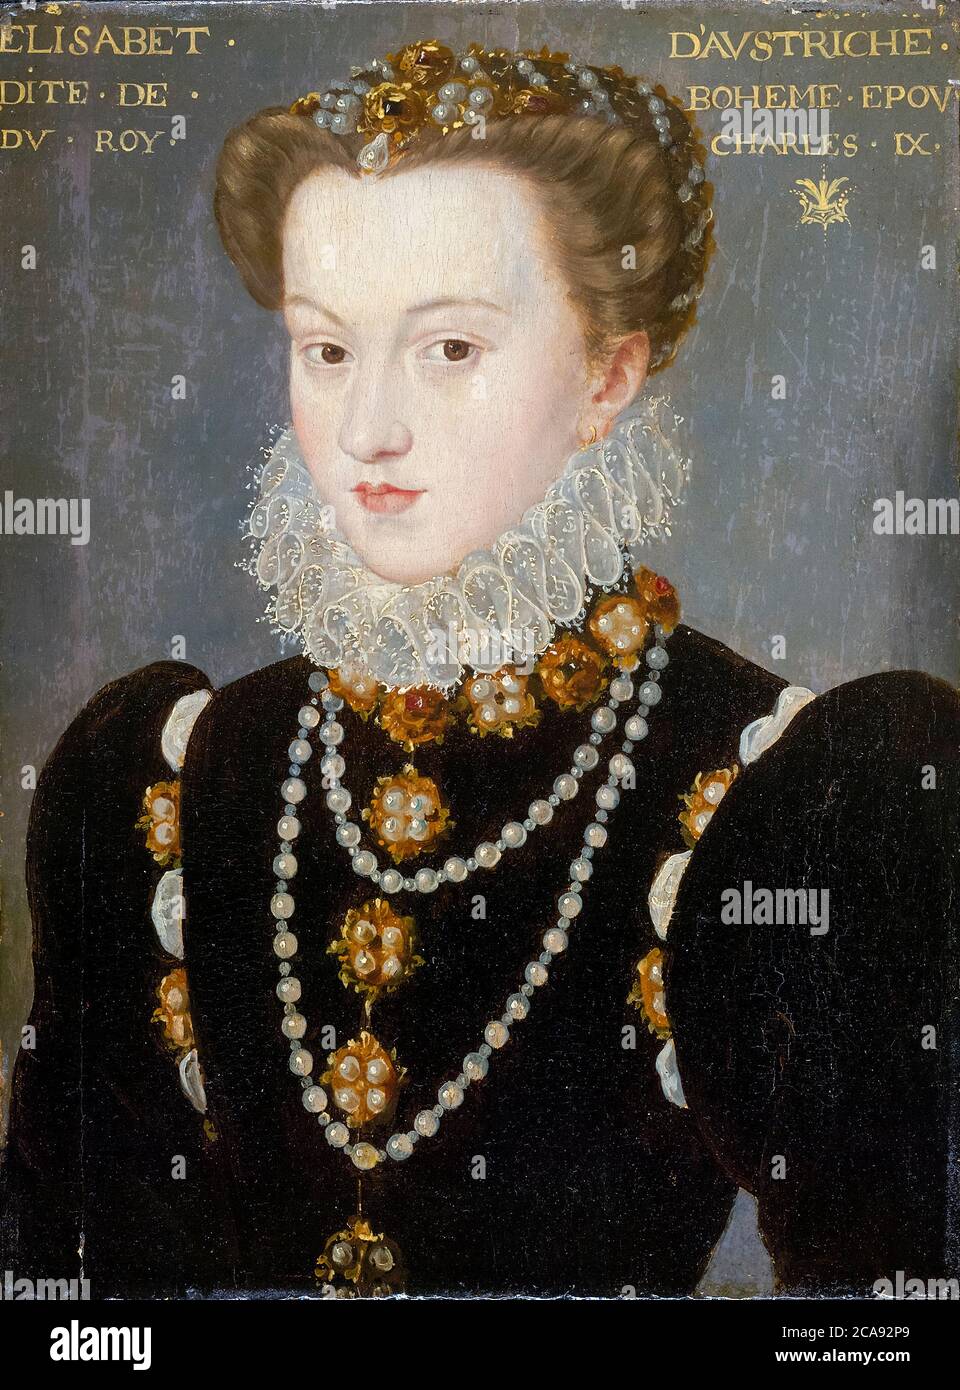 Elisabeth of Austria (1554-1592), Queen of France, portrait painting by Circle of François Clouet, after 1571 Stock Photo